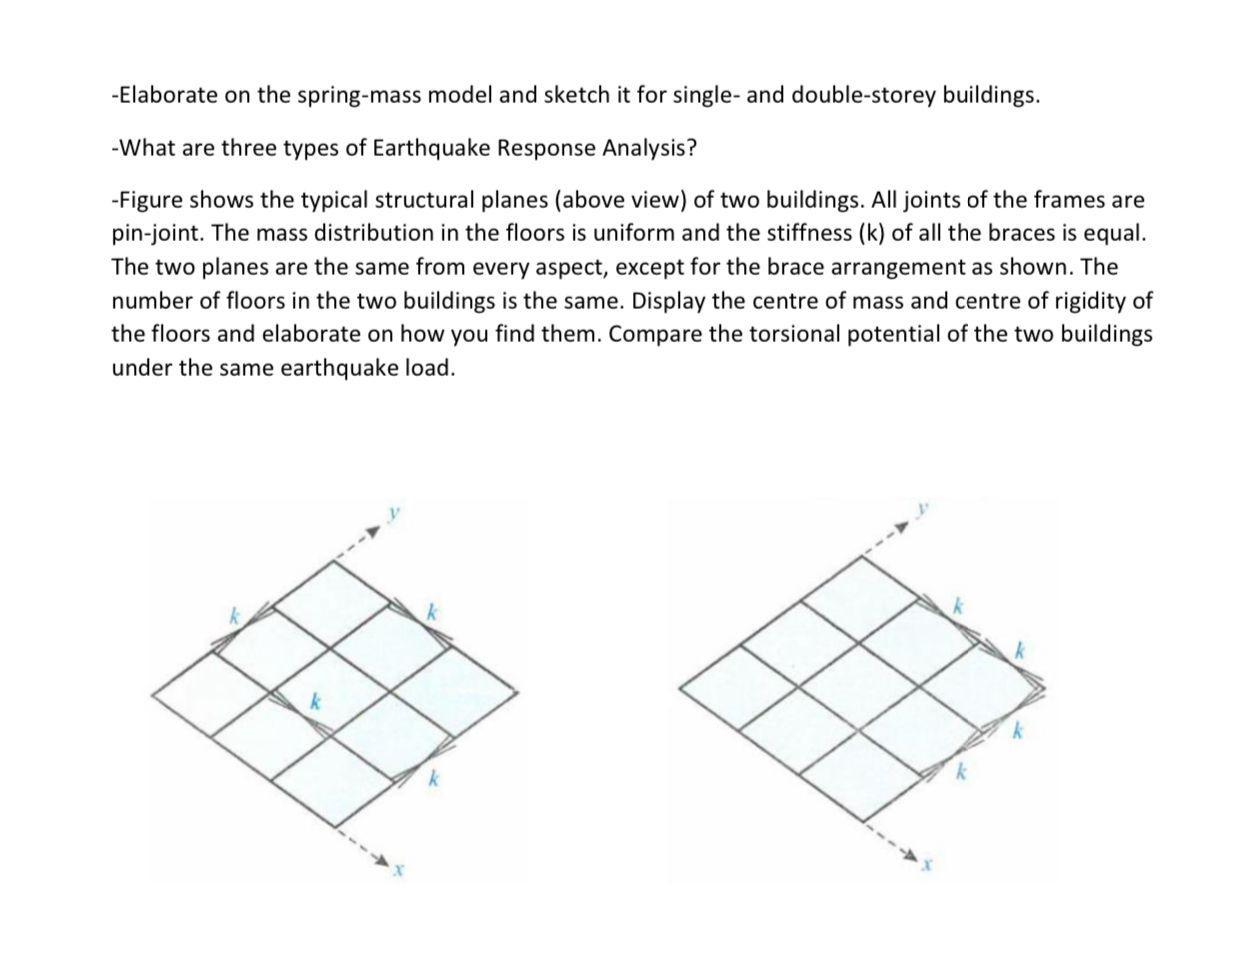 -Elaborate on the spring-mass model and sketch it for single- and double-storey buildings. -What are three